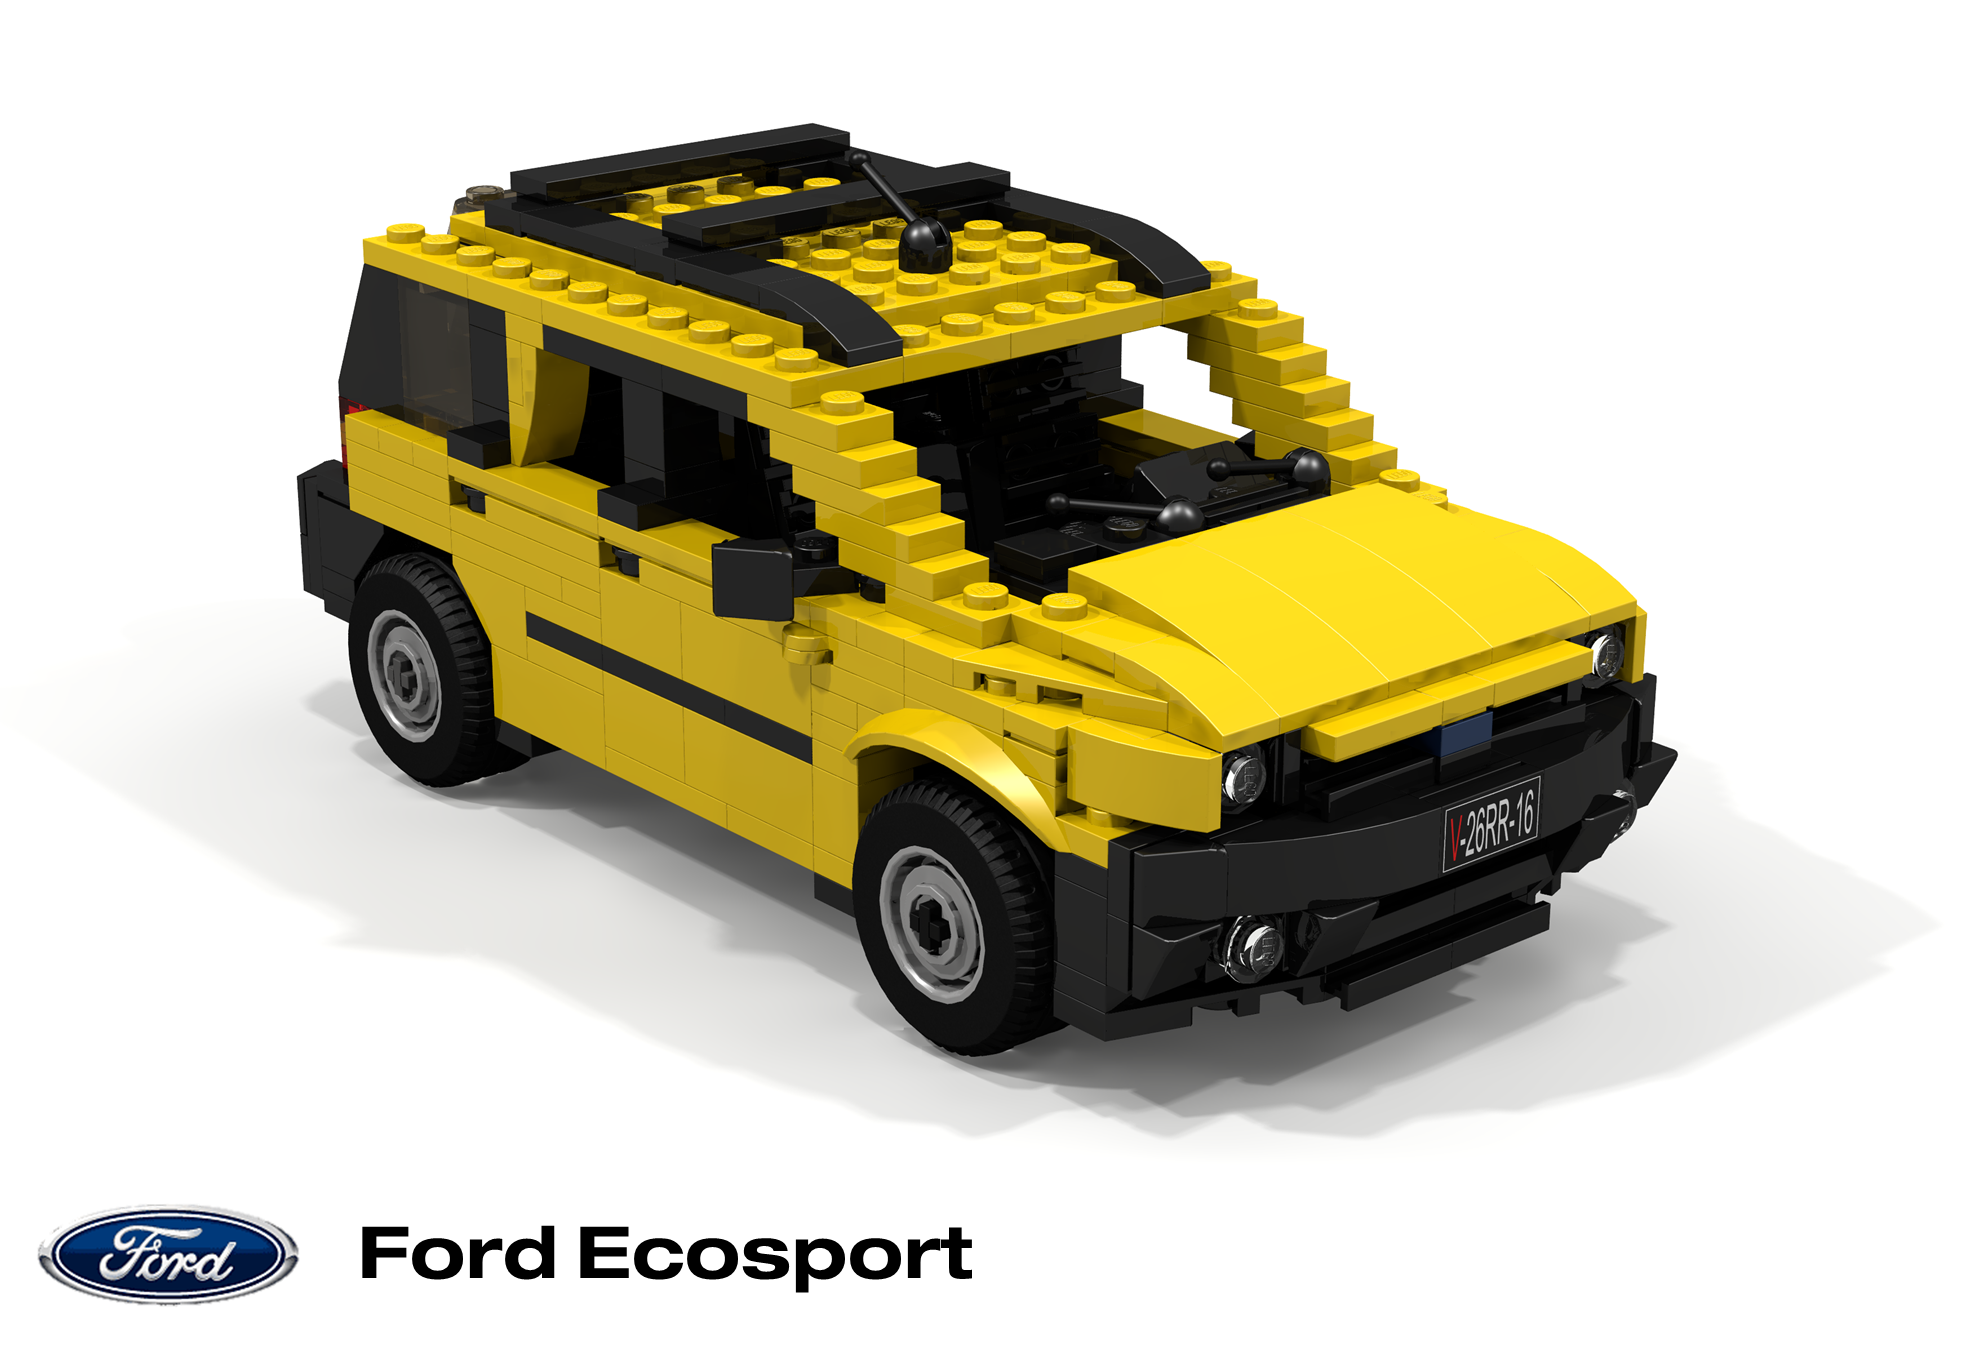 2004_ford_ecosport_bv226.png